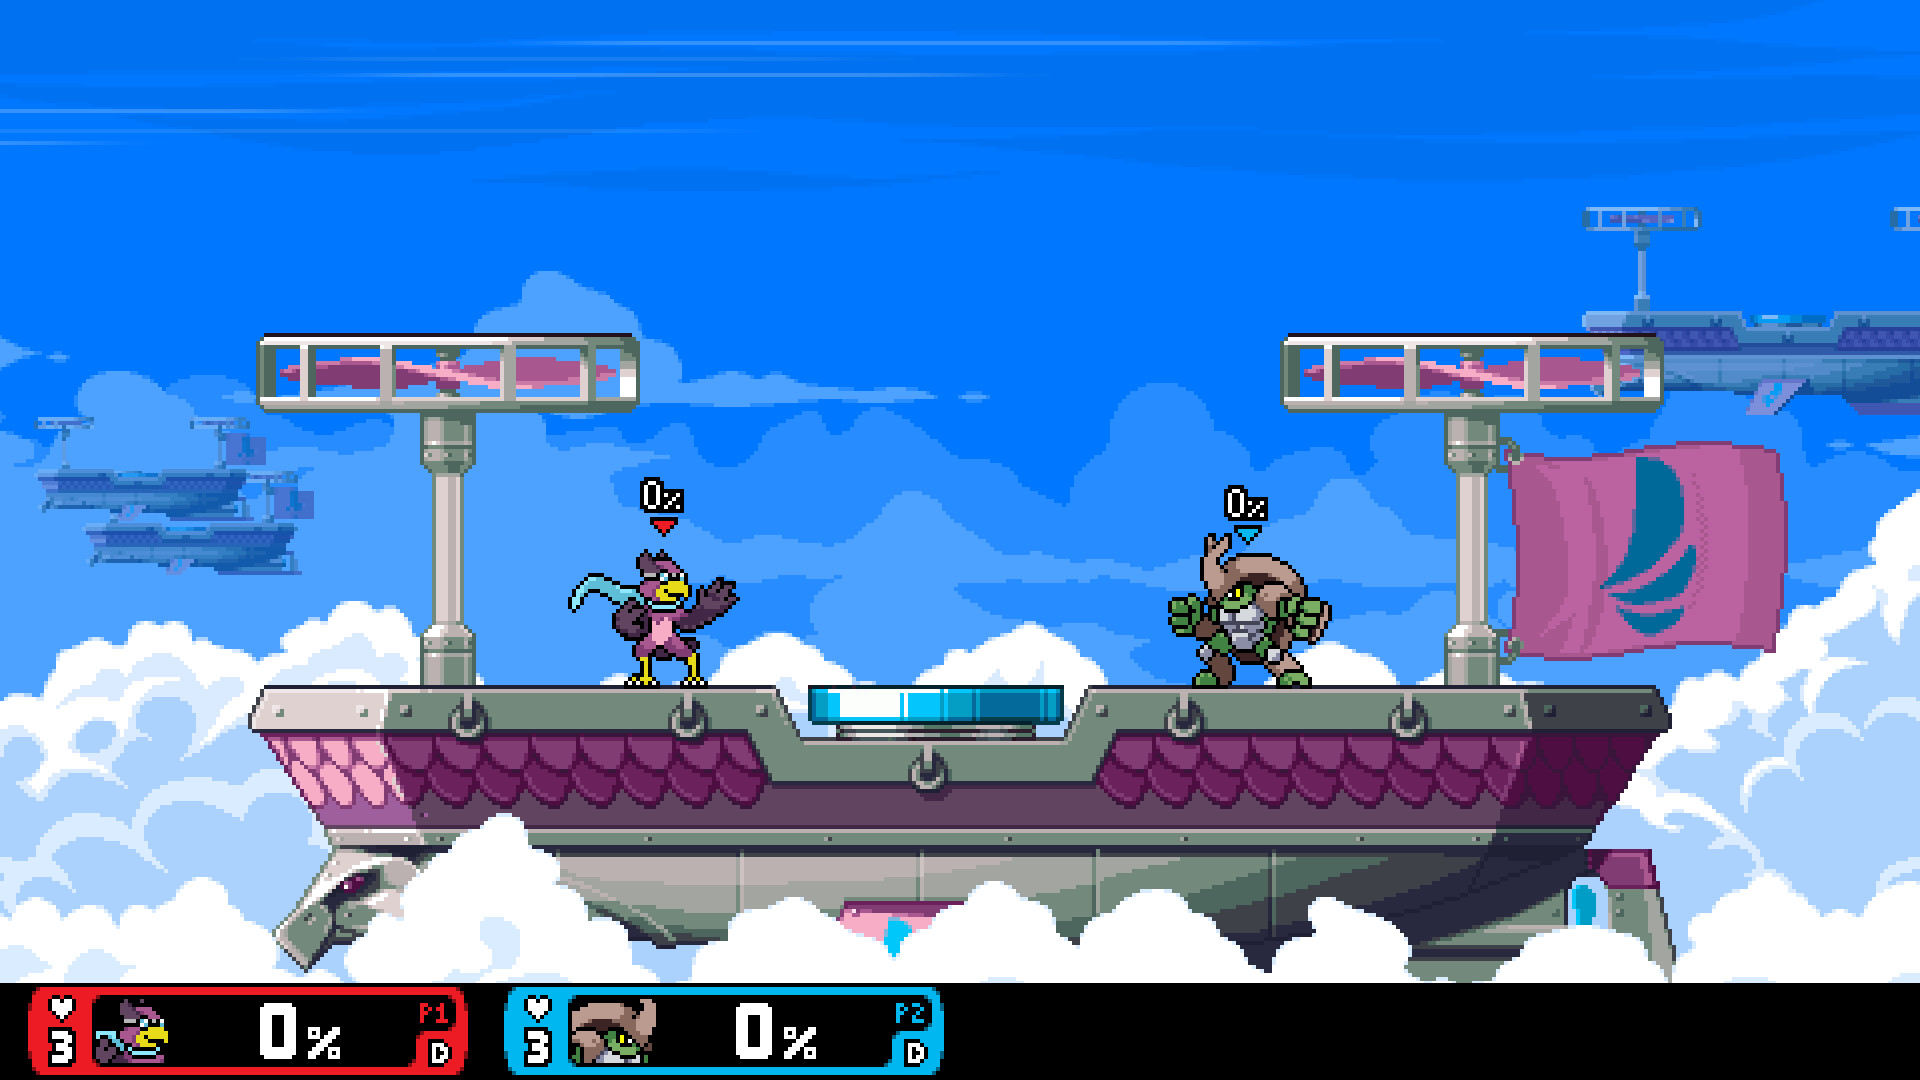 Rivals of Aether - Games like Super Smash Bros